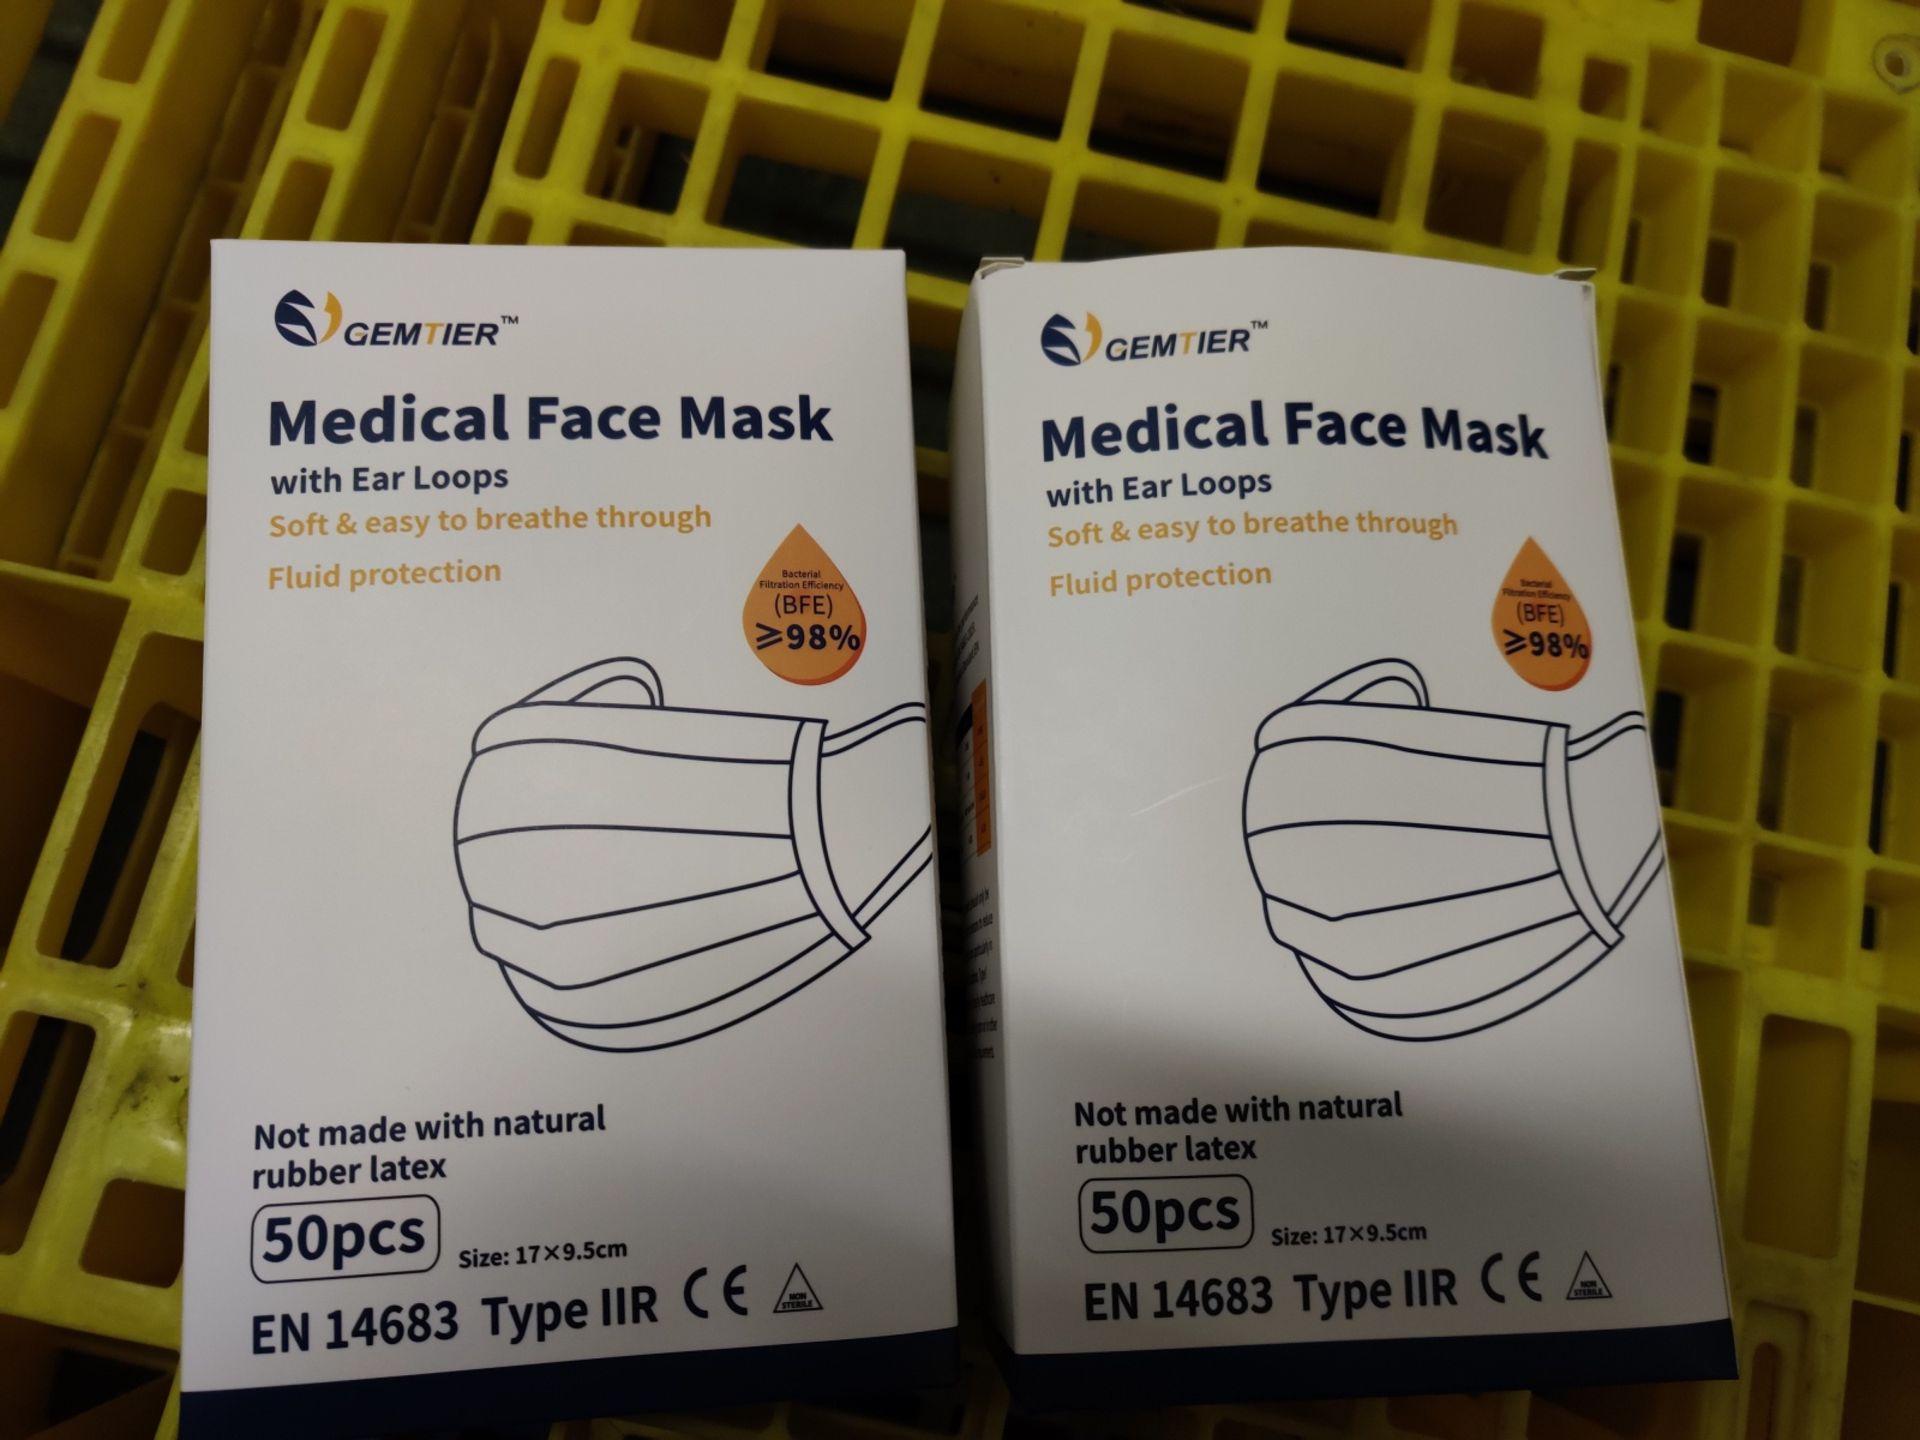 Type IIR Triple Layer Surgical Face Masks (2000pcs) UK delivery included - Image 5 of 8